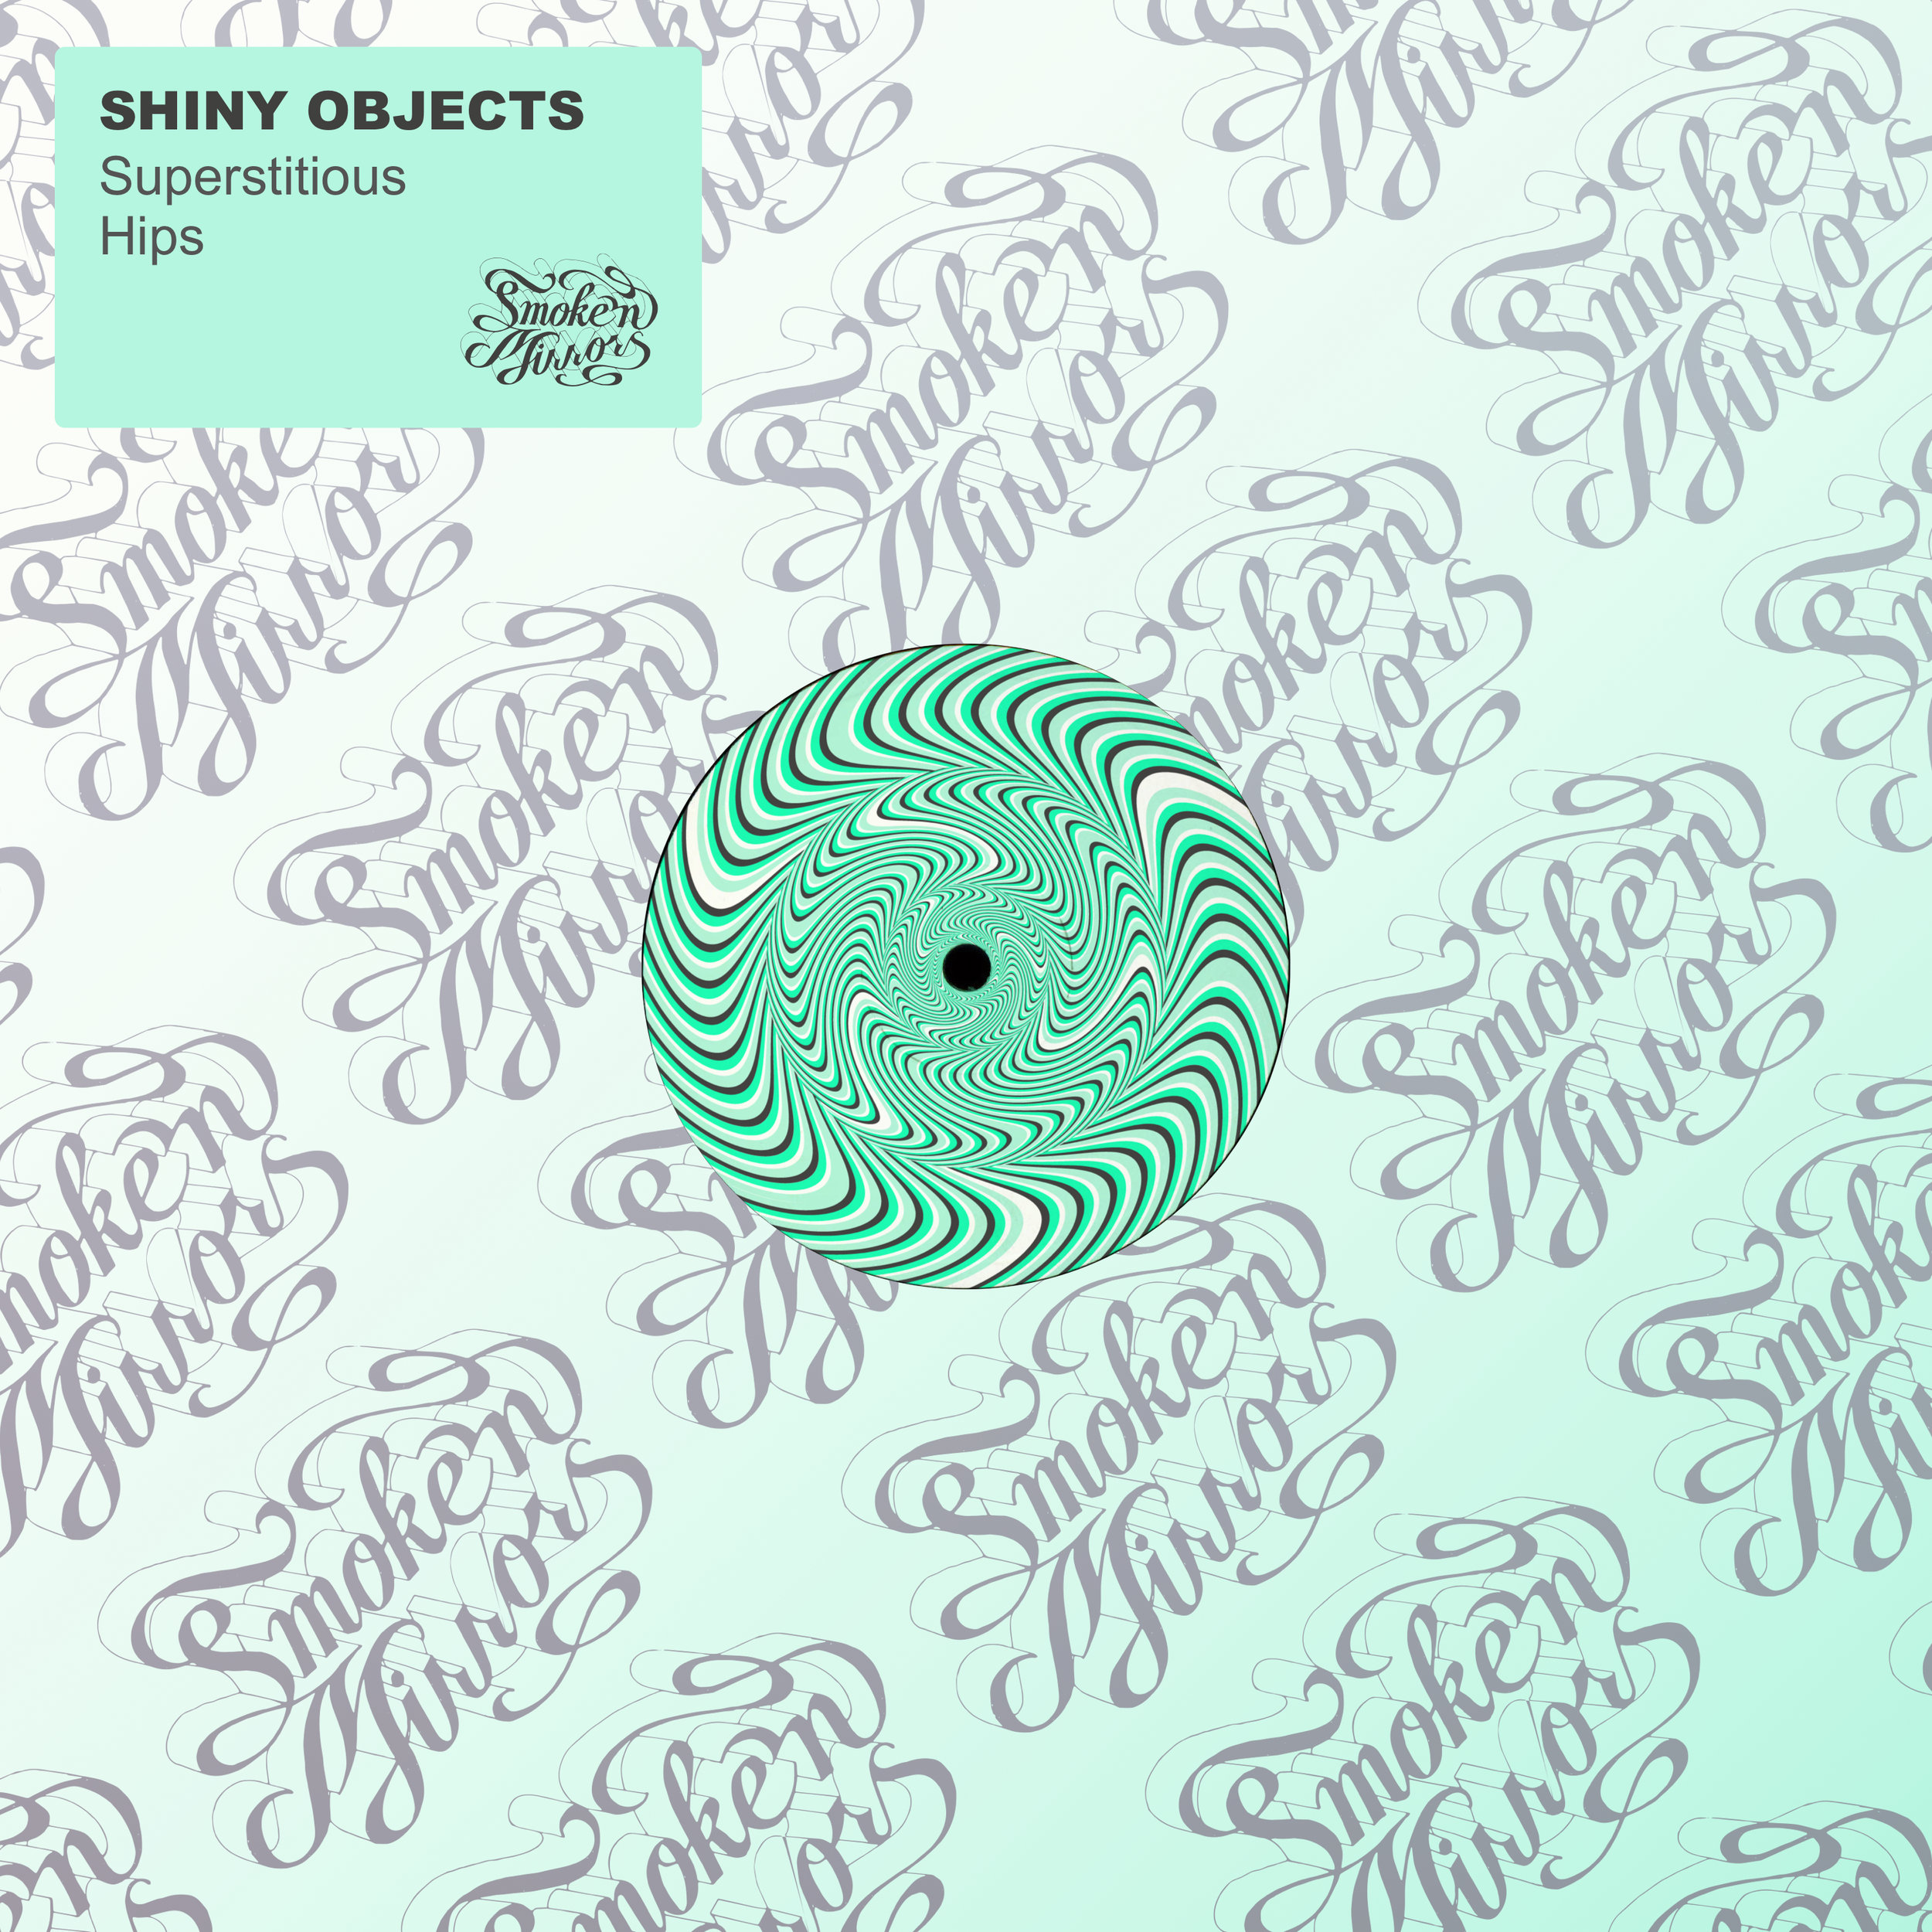 Shiny Objects - Superstitious Hips